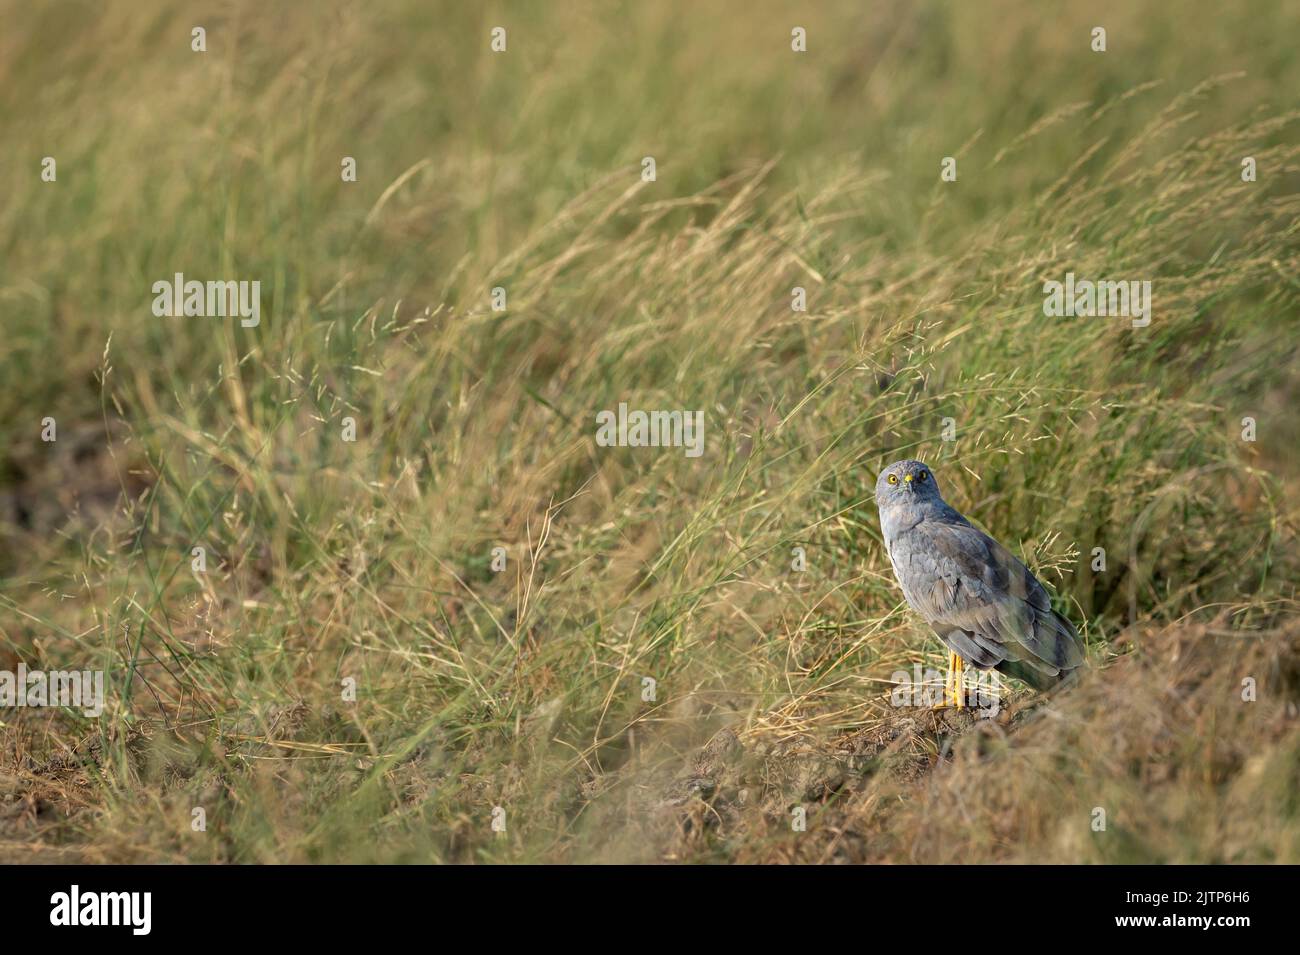 Montagu harrier male or Circus pygargus bird ground perched with eye contact in natural green grass or meadow during winter migration at tal chhapar Stock Photo